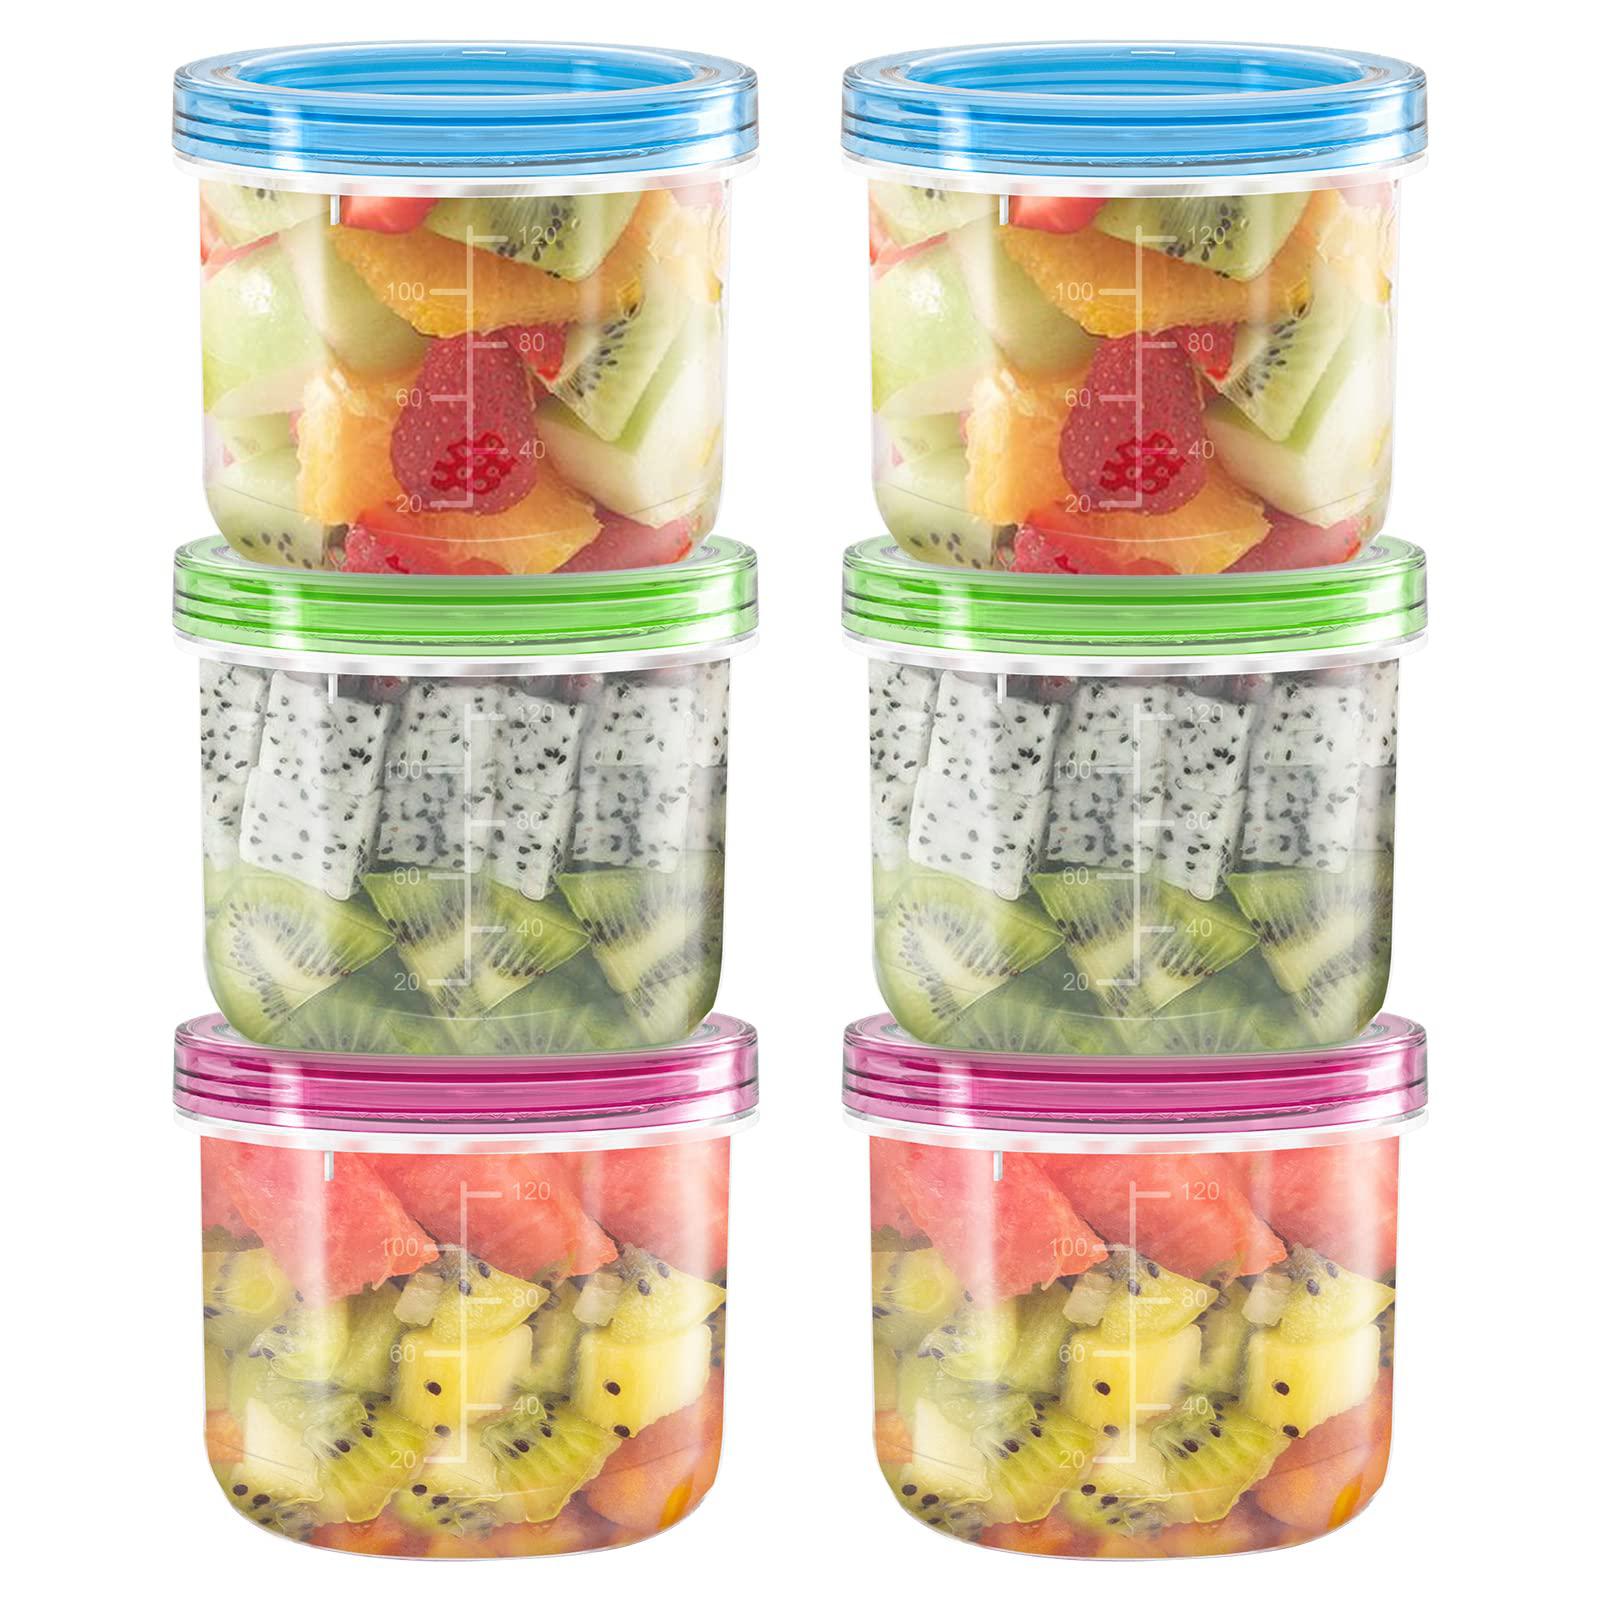 Mosville mosville small containers with lids - 6 sets, 4 oz reusable and  leak proof salad dressing container and condiment containers